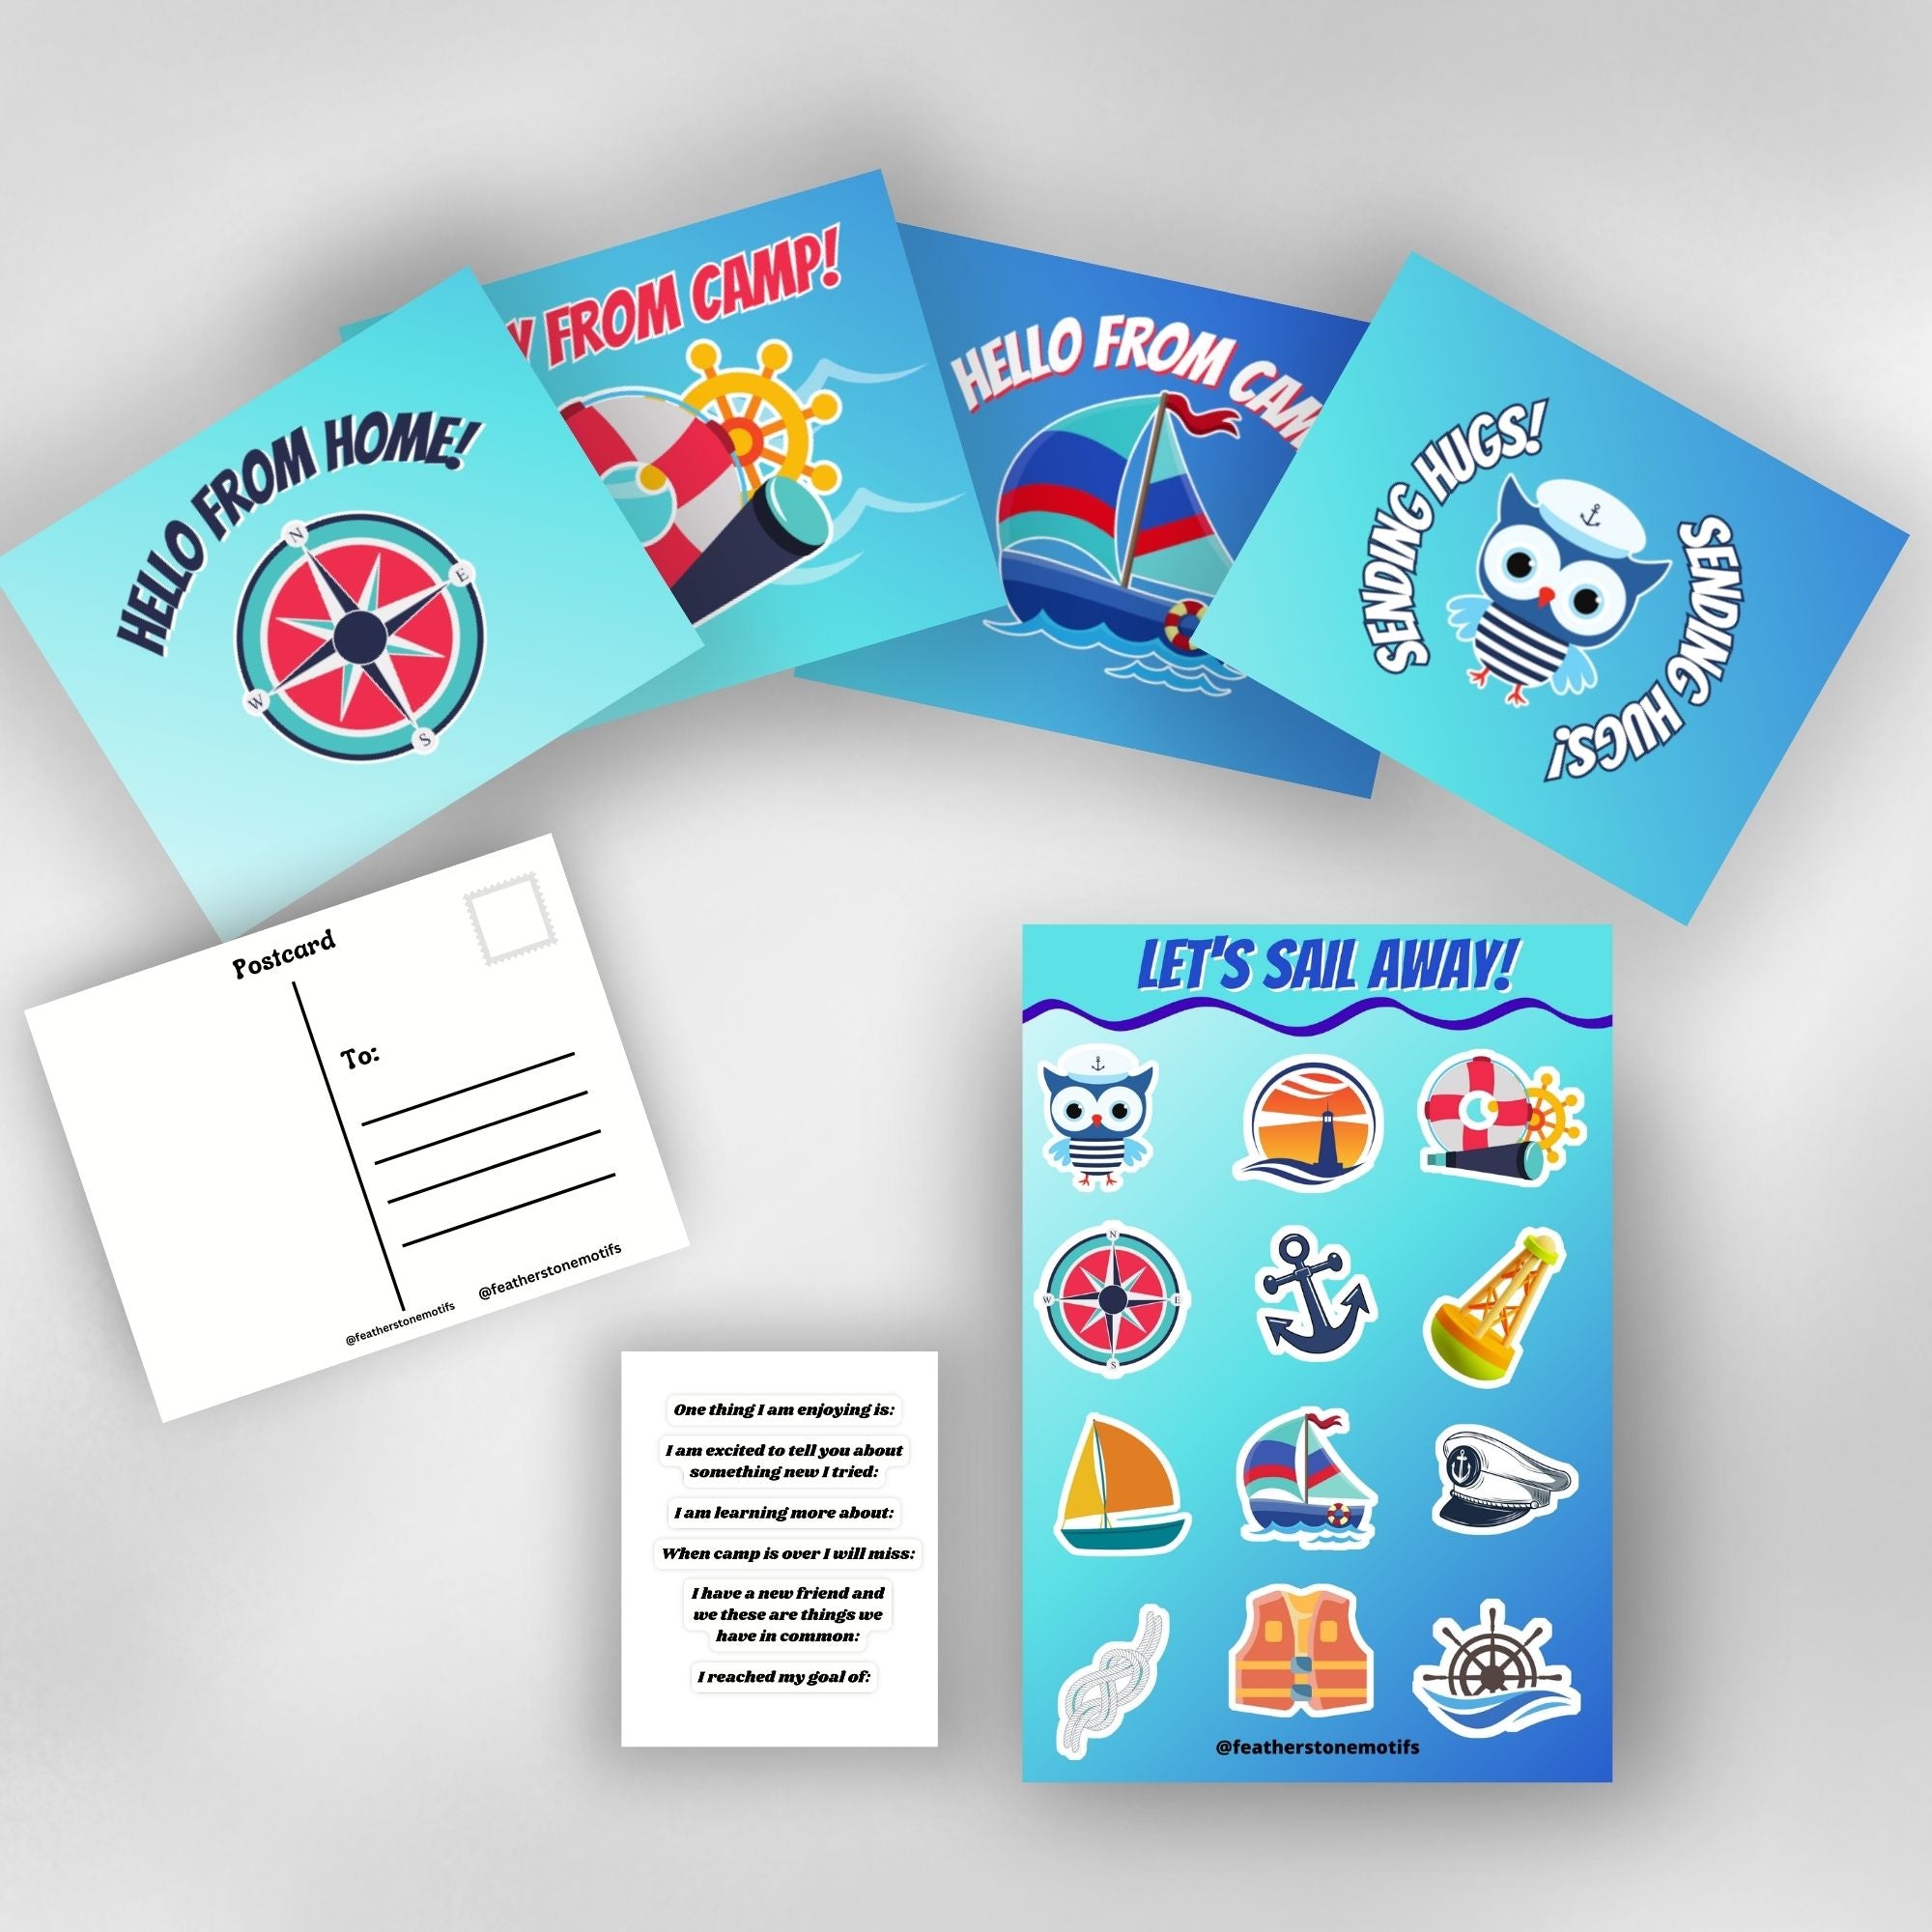 This image shows the full Sailing themed Camp Postcard Kit.